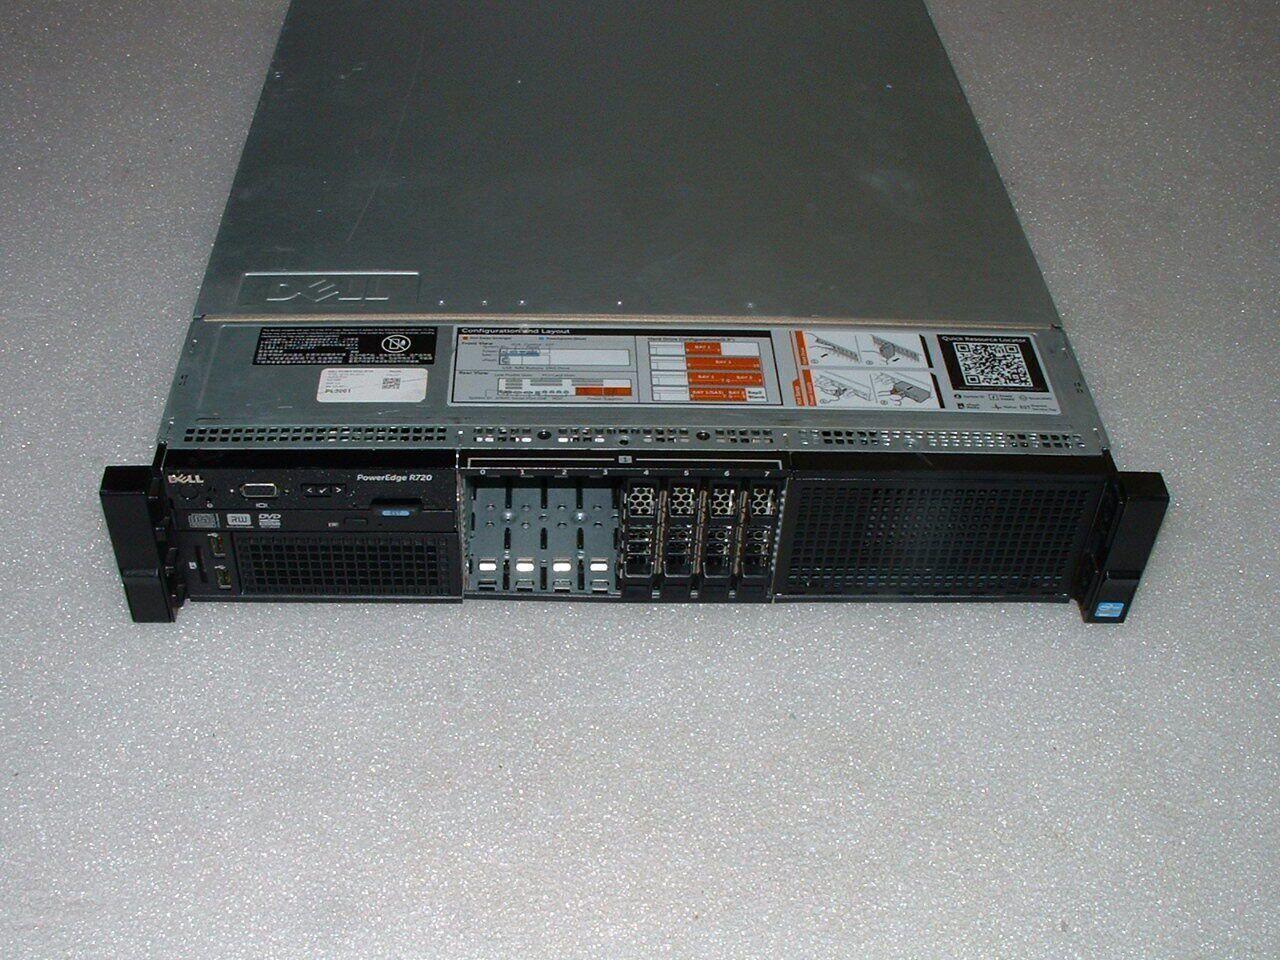 Dell Poweredge R720 2x Xeon E5-2660 v2 2.2GHz 20-Cores / No RAM or HDD / H710